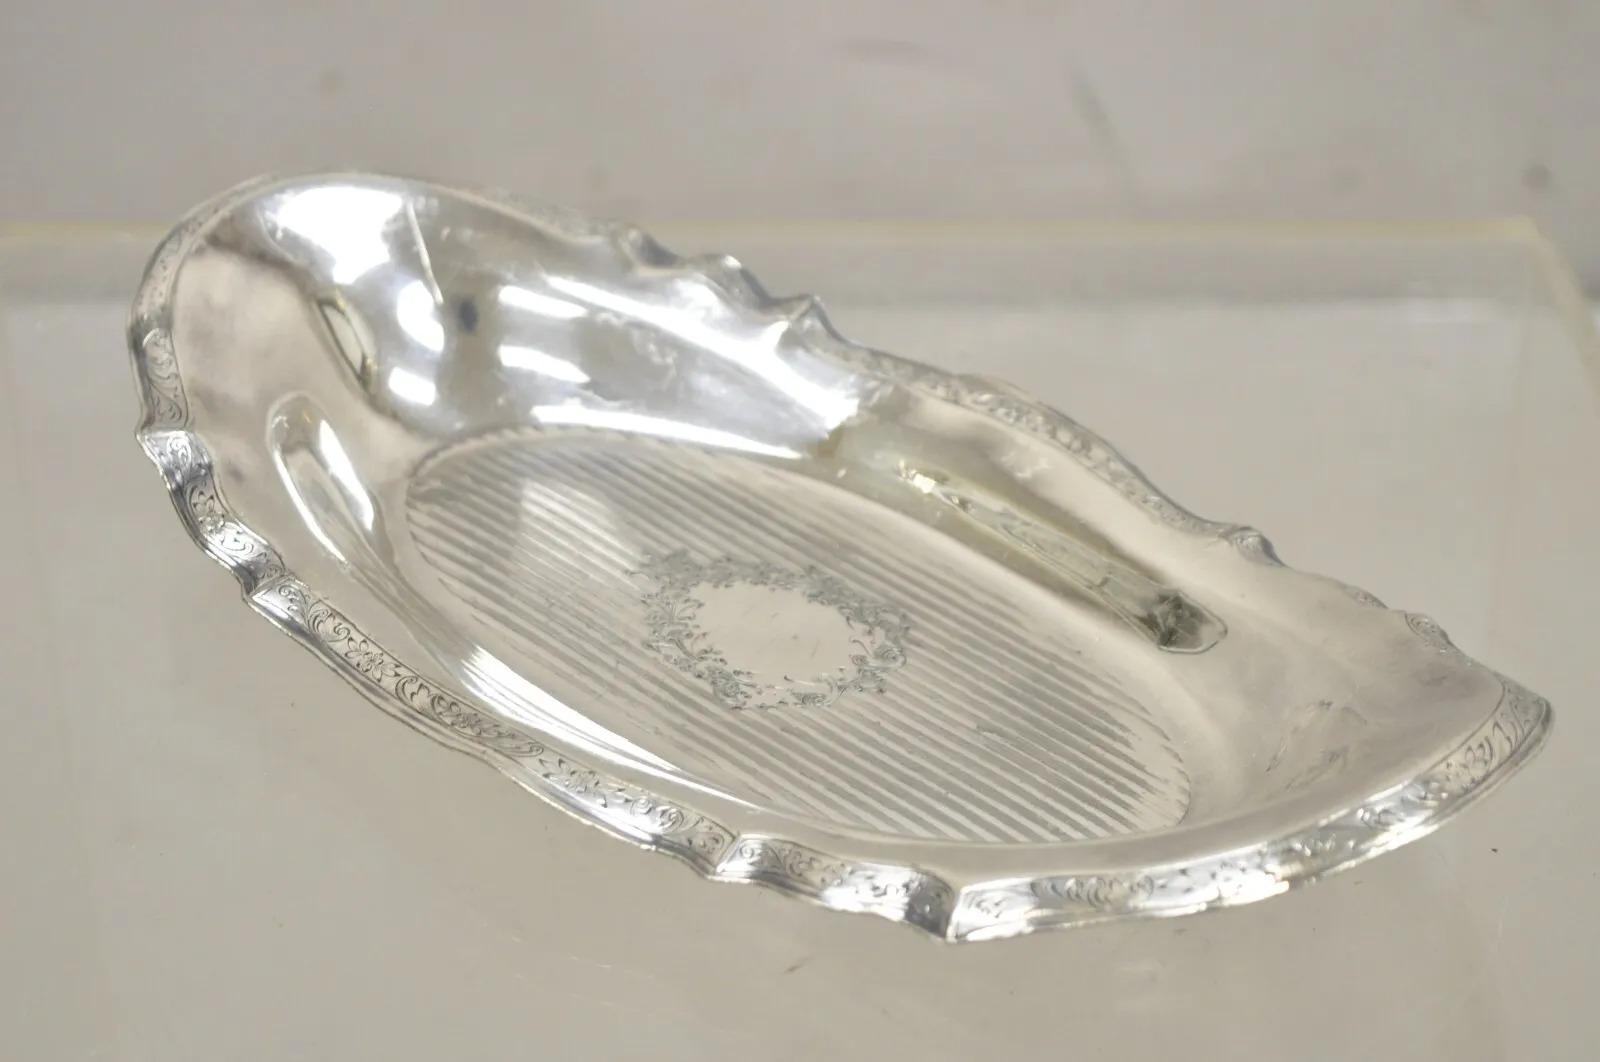 Vintage Art Nouveau Silver Plated Oval Trinket Dish Candy Dish Tray In Good Condition For Sale In Philadelphia, PA